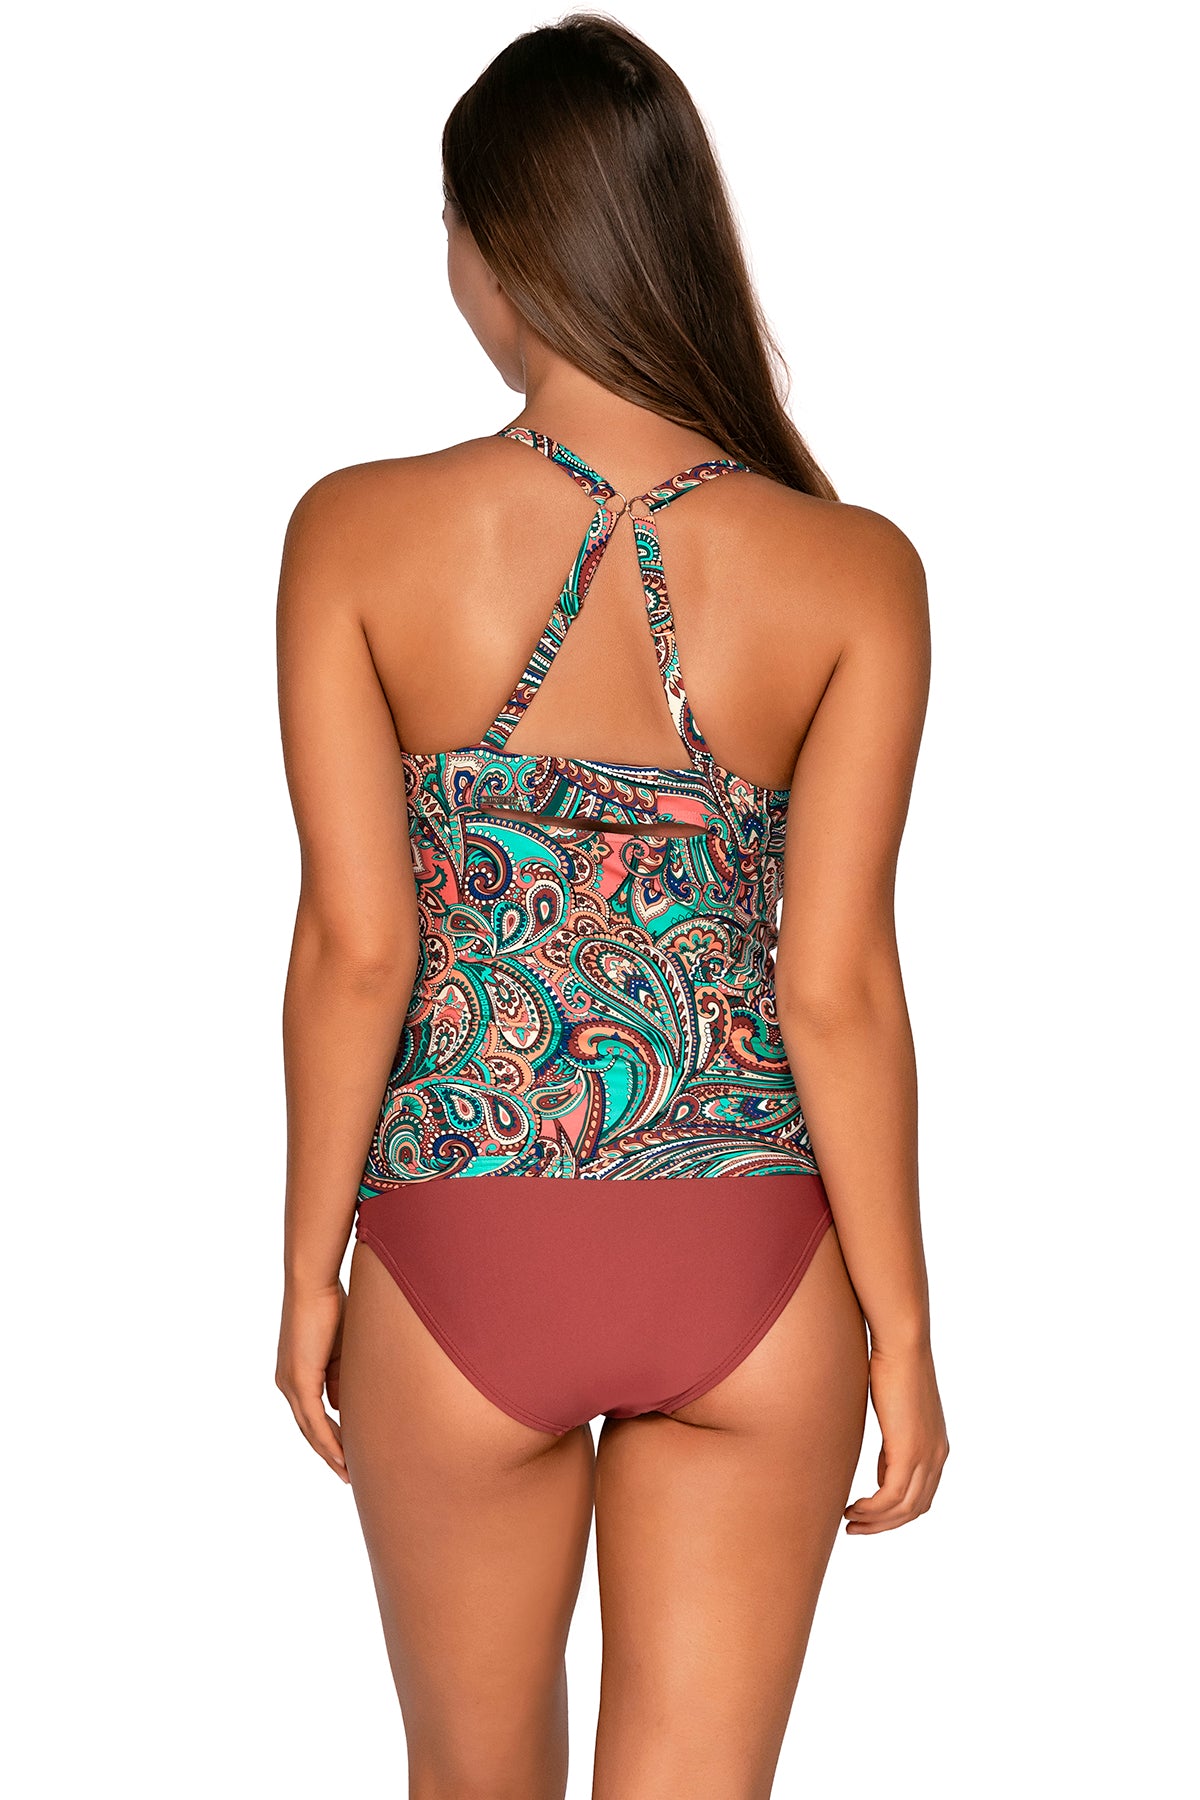 Back view of Sunsets Andalusia Serena Tankini Top showing crossback straps with matching Femme Fatale Hipster bikini bottom